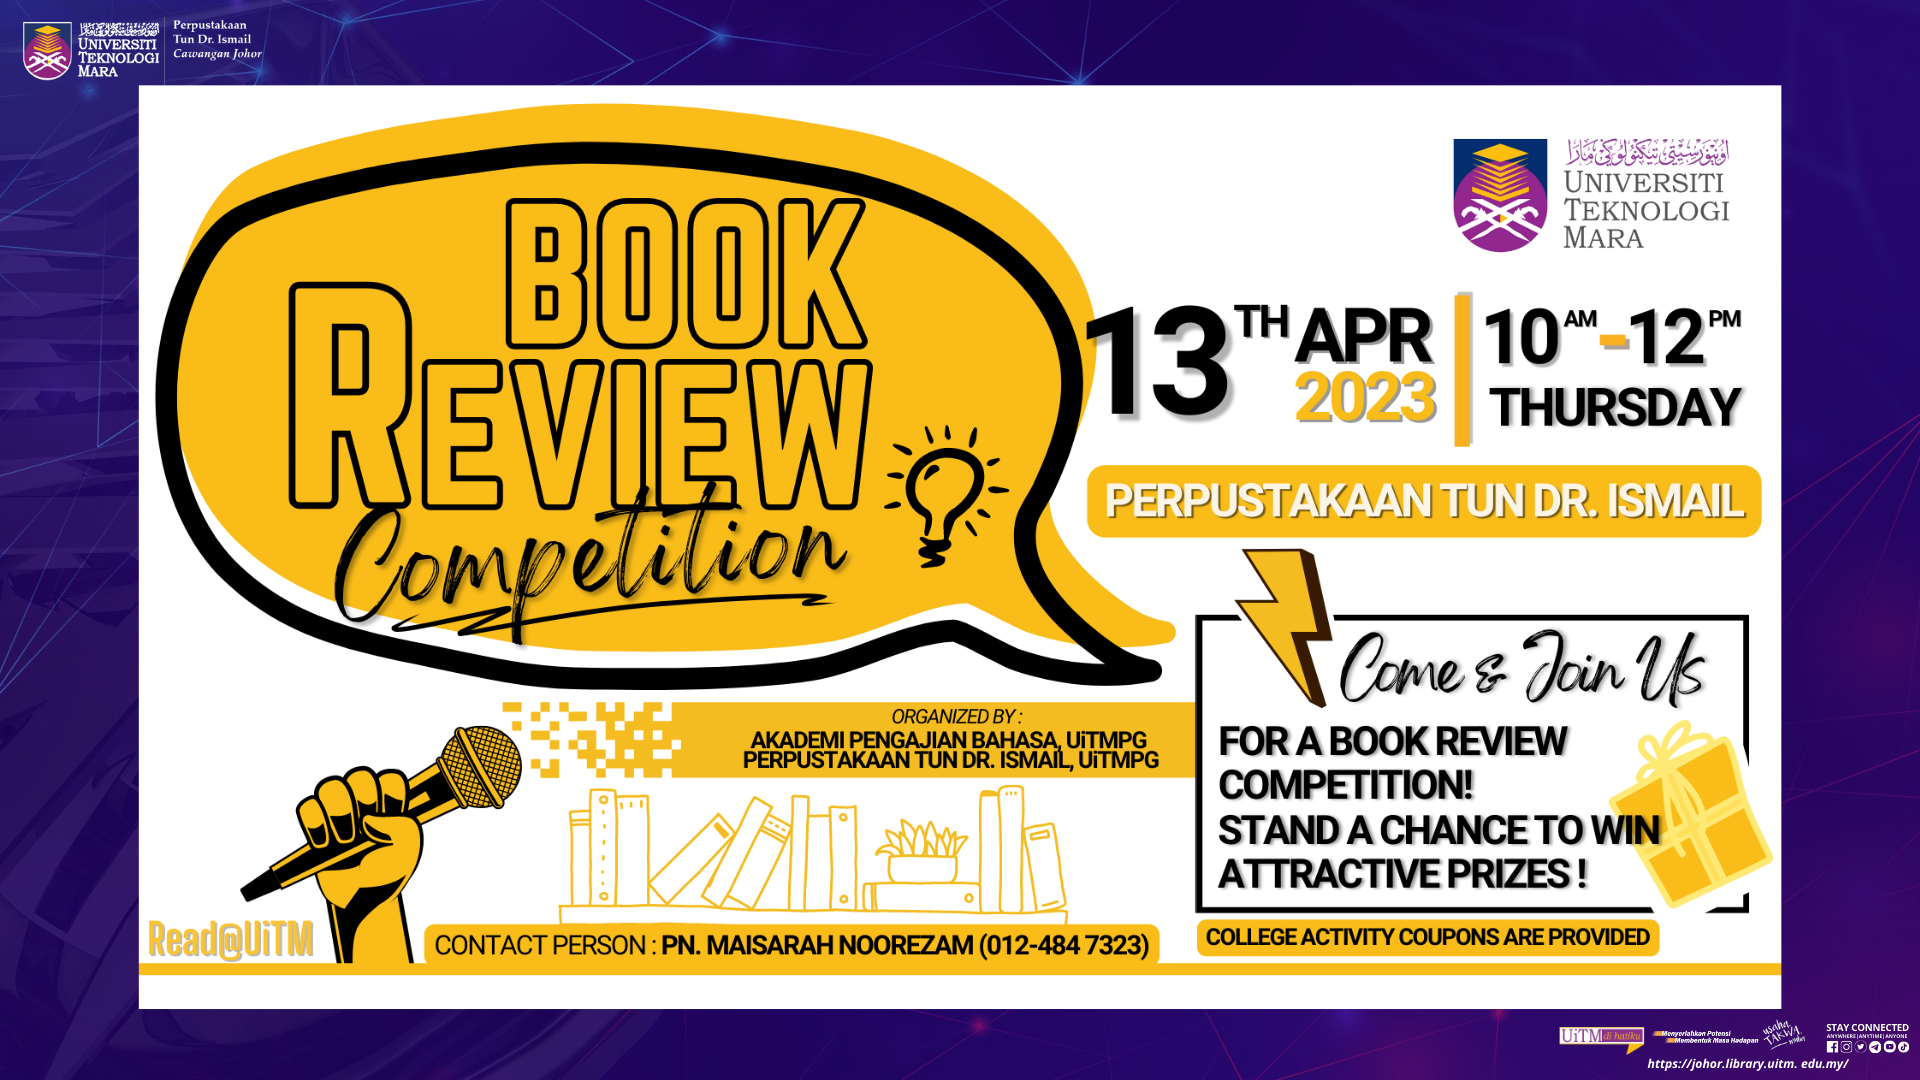 BOOK REVIEW COMPETITION